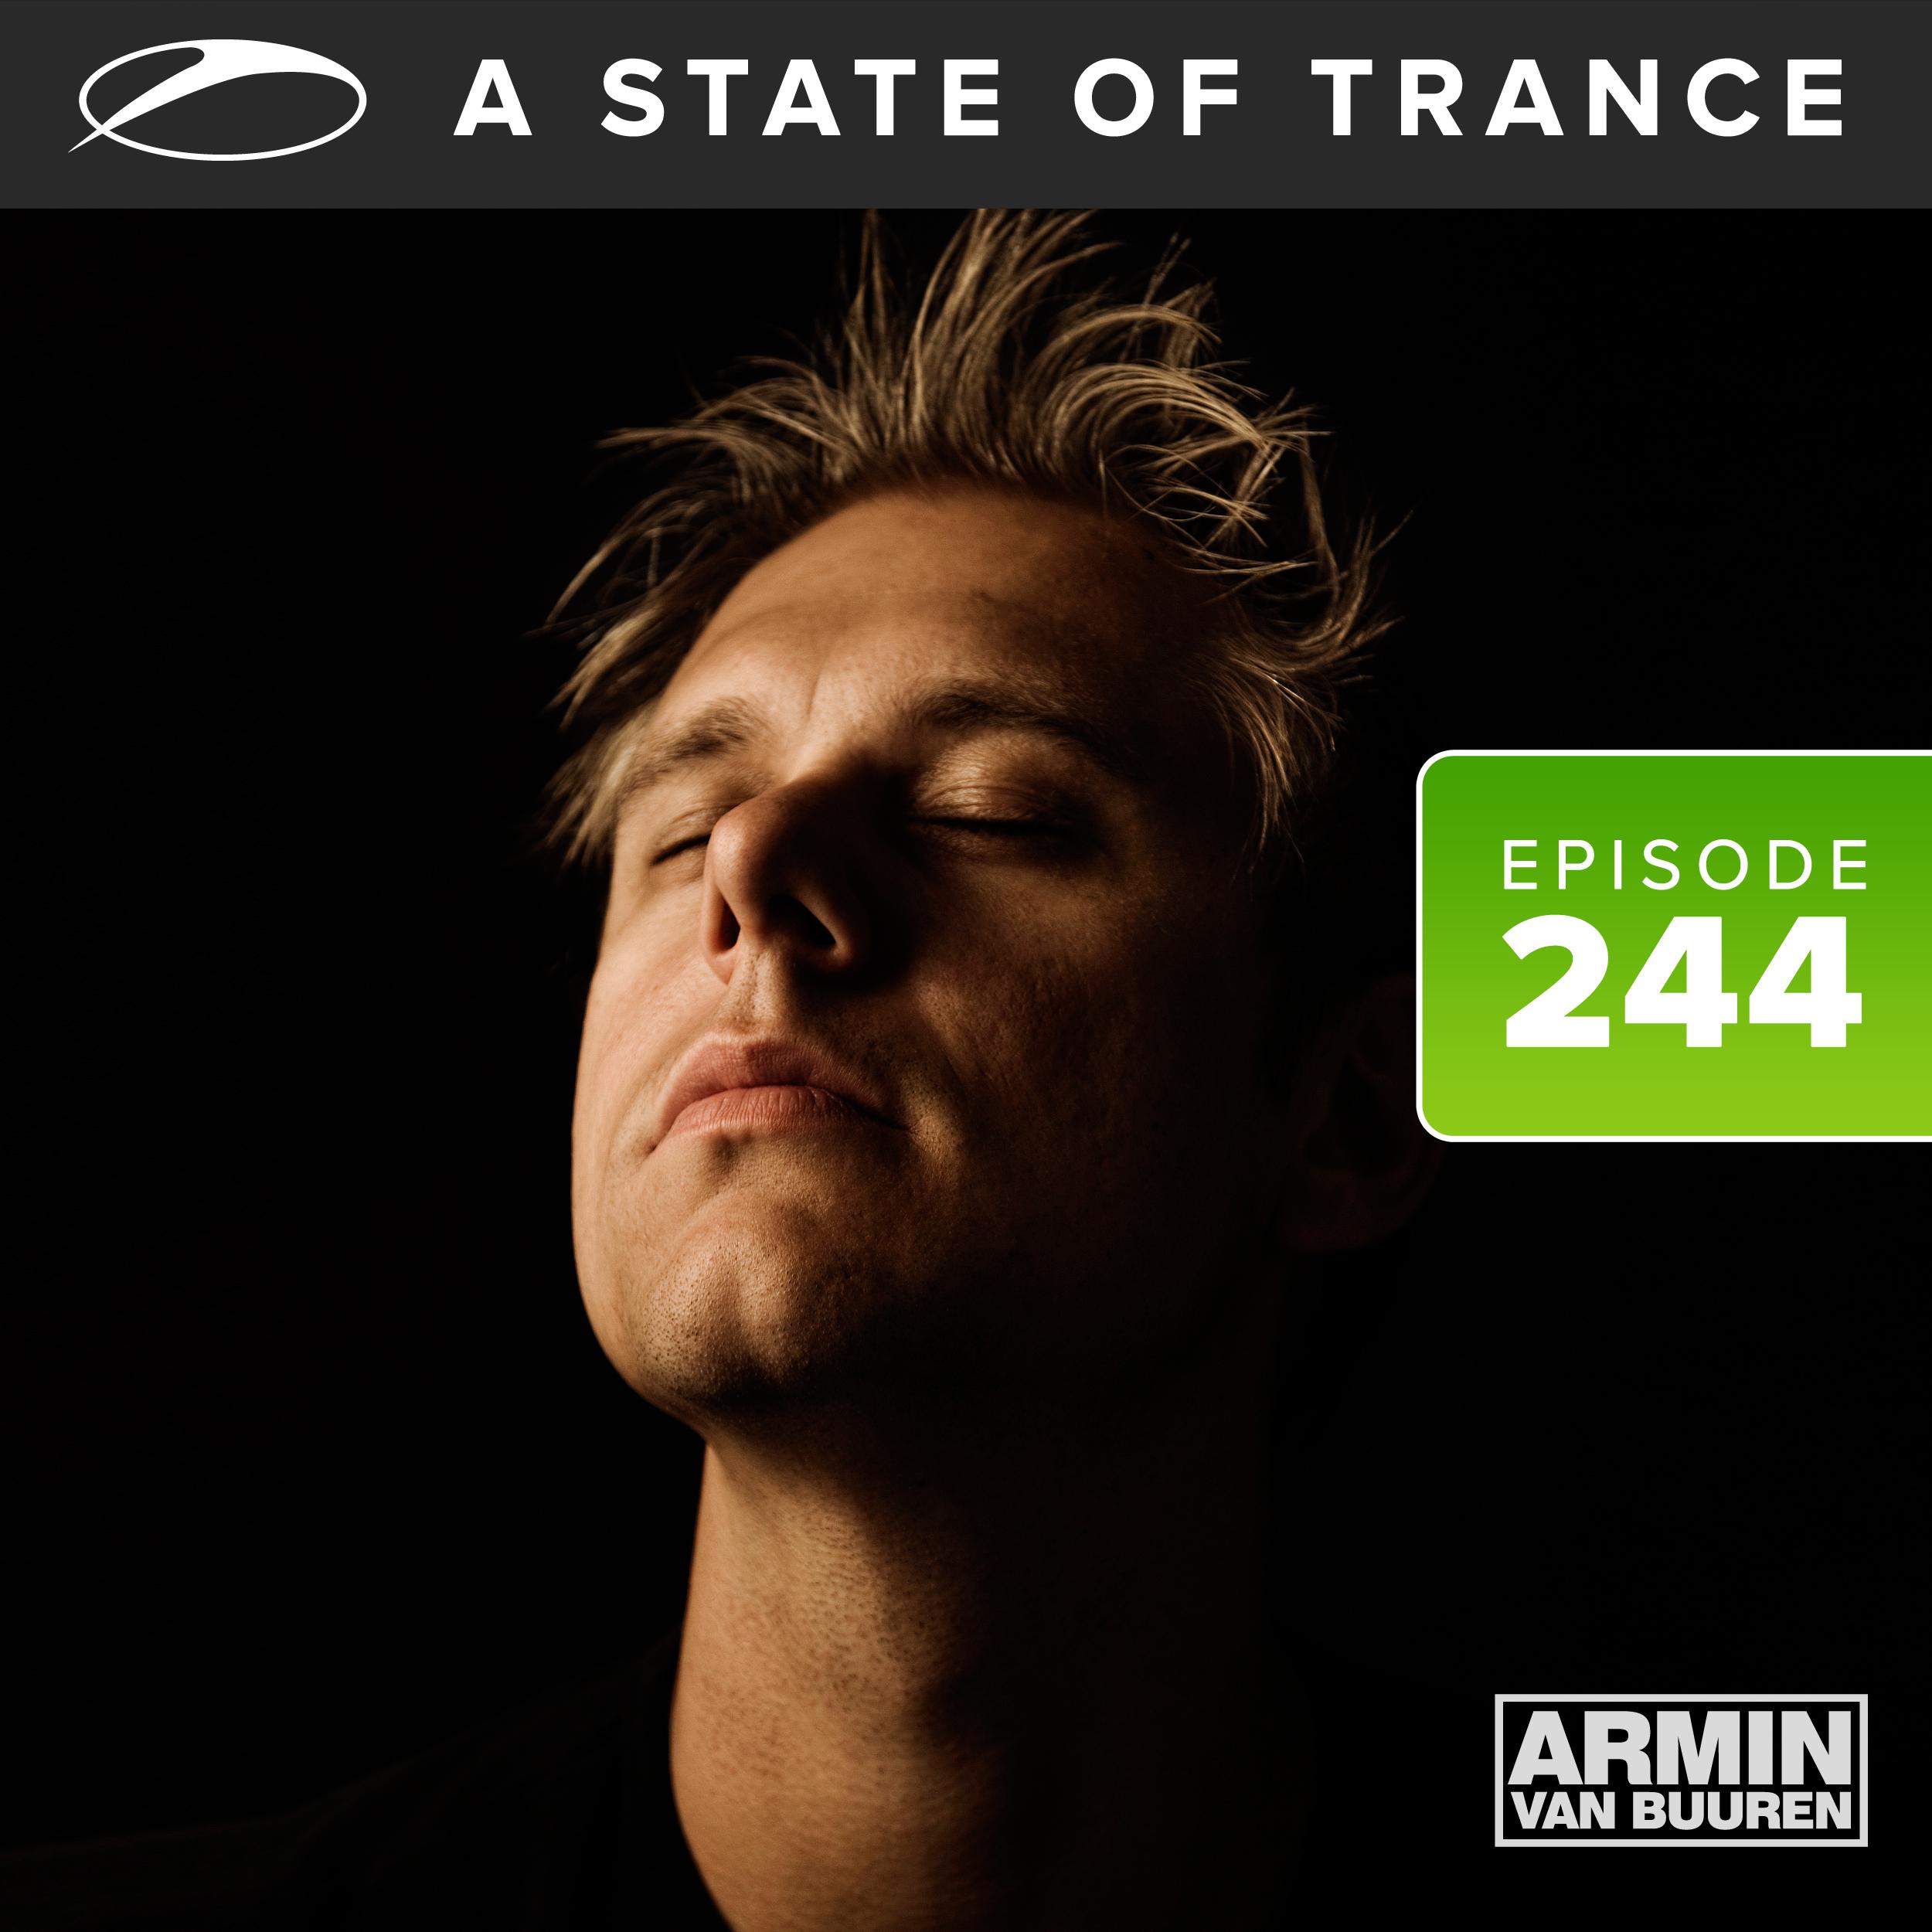 A State Of Trance Episode 244